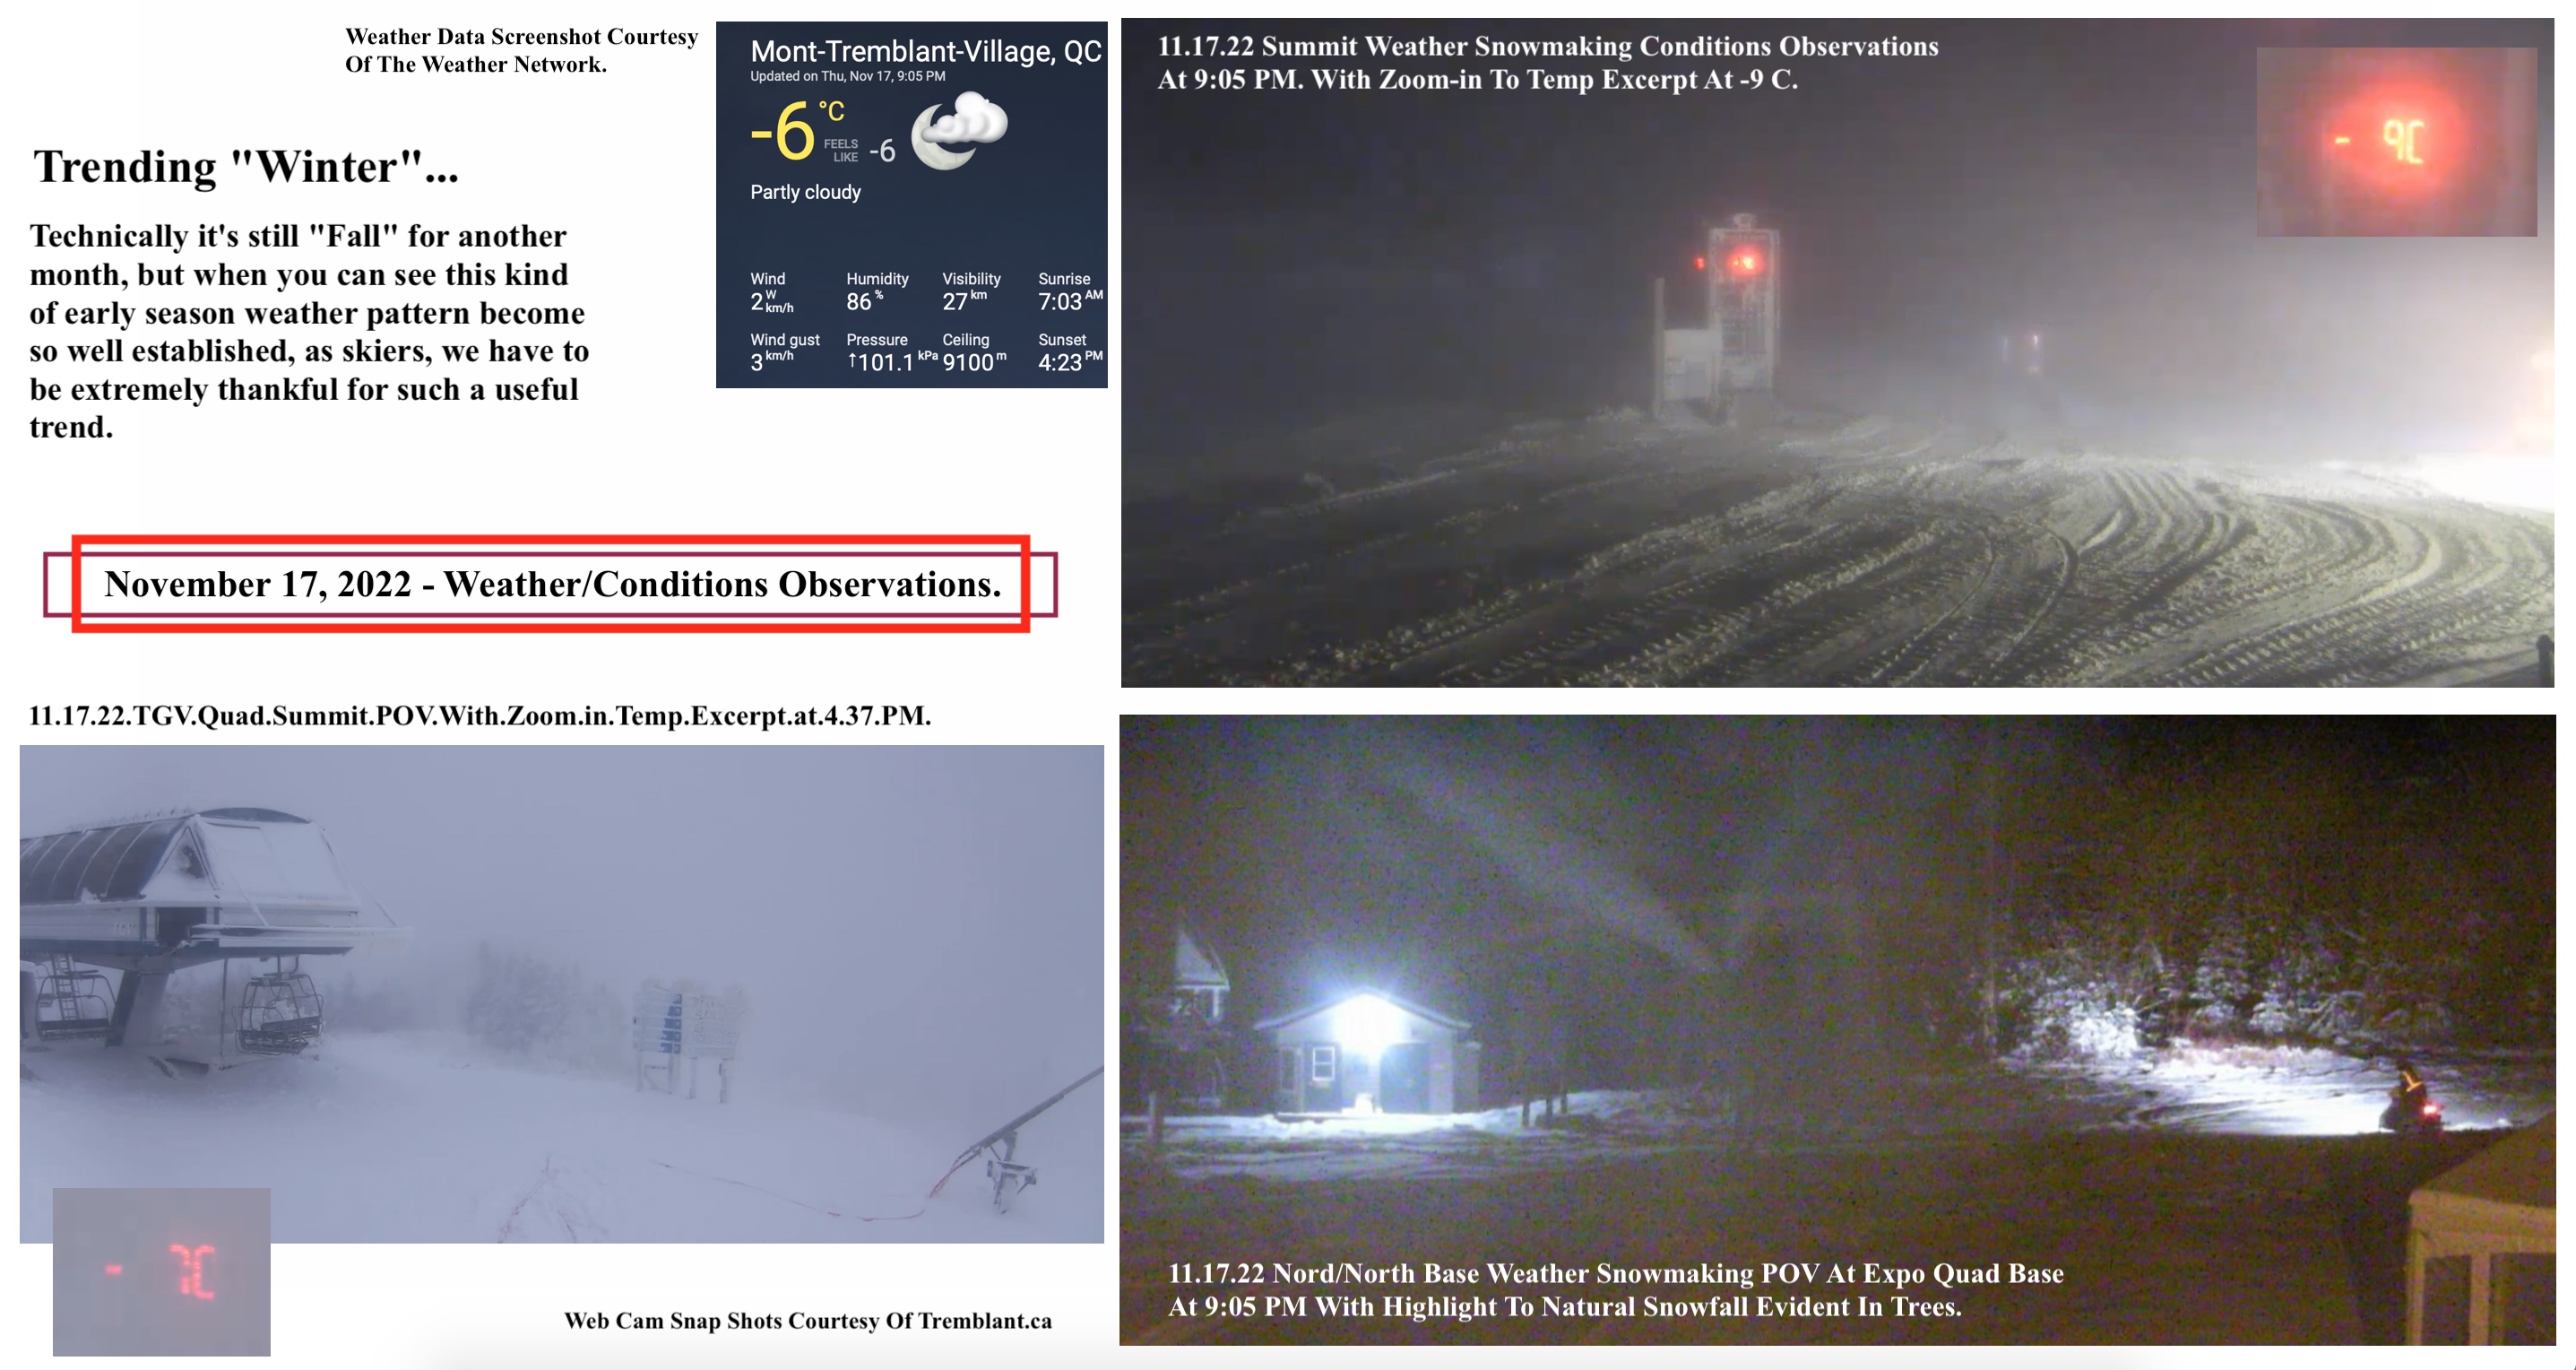 11.17.22.Weather.Snowmaking.Conditions.Observations.a.jpg